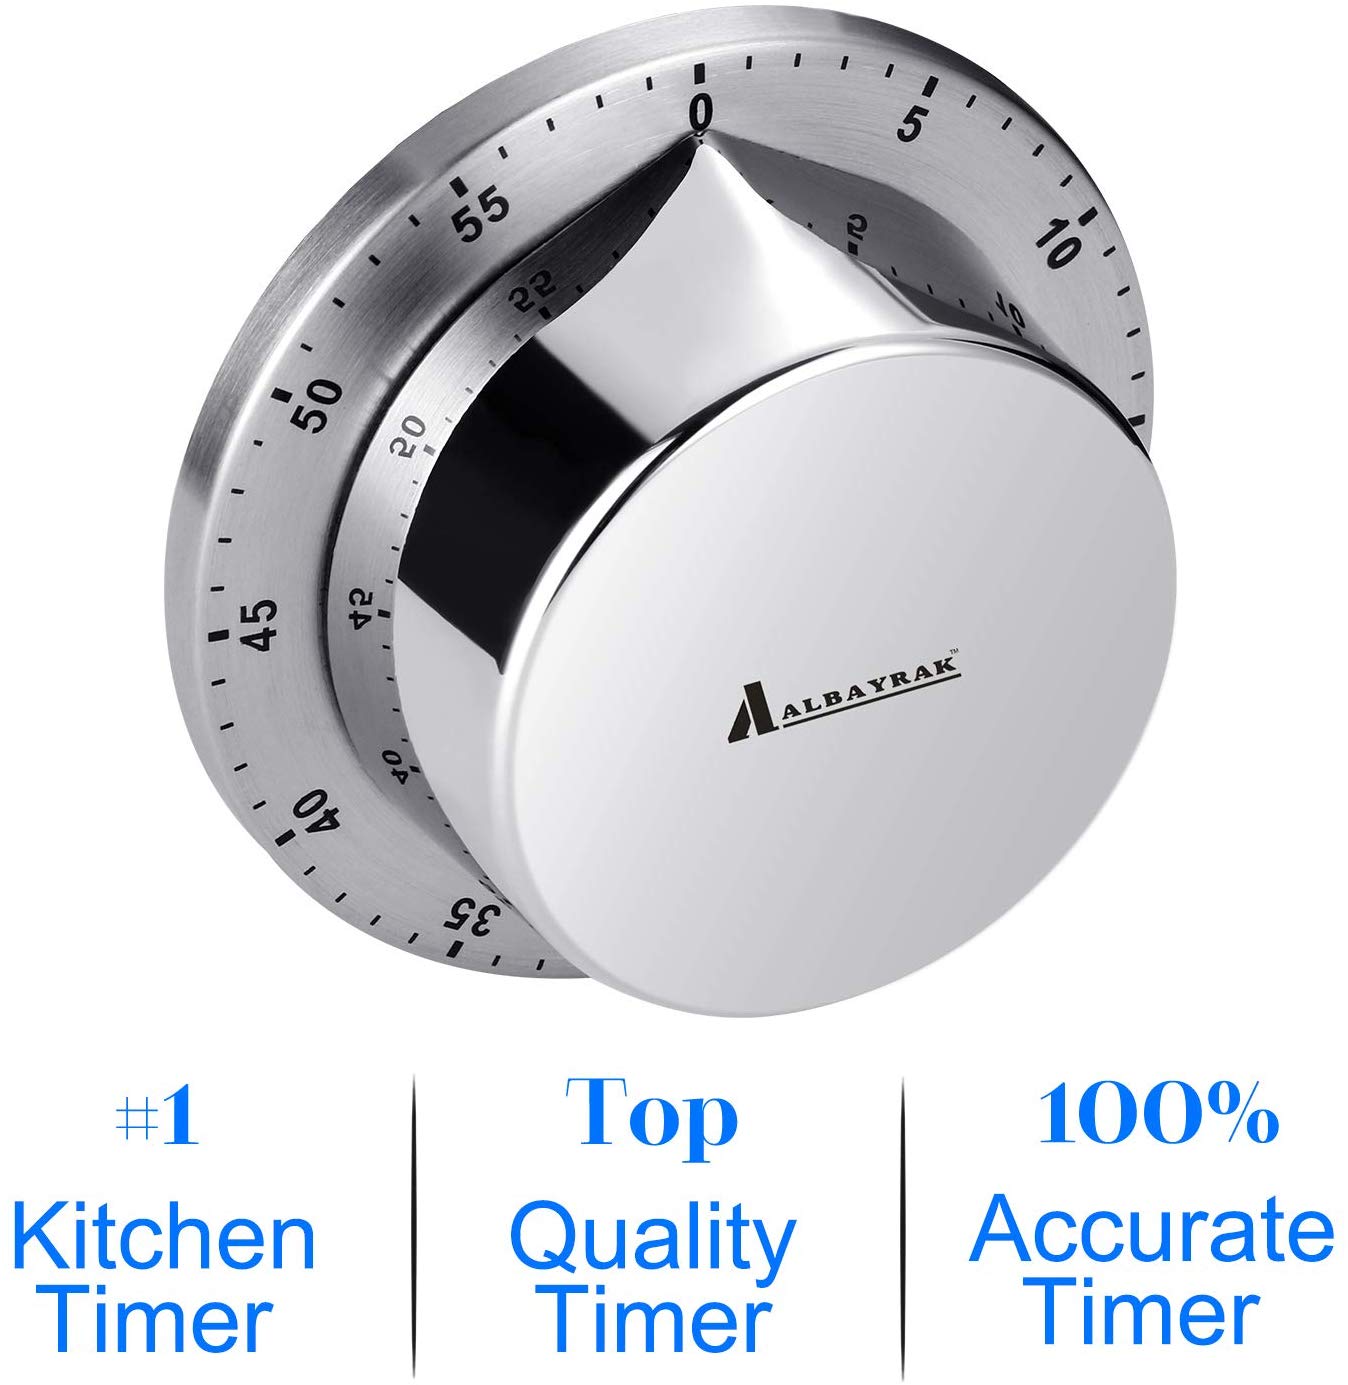 Stainless Steel Kitchen Timer Digital for Cooking Shower Study Manual Mechanical Stopwatch Alarm Clock Cooking Countdown Time